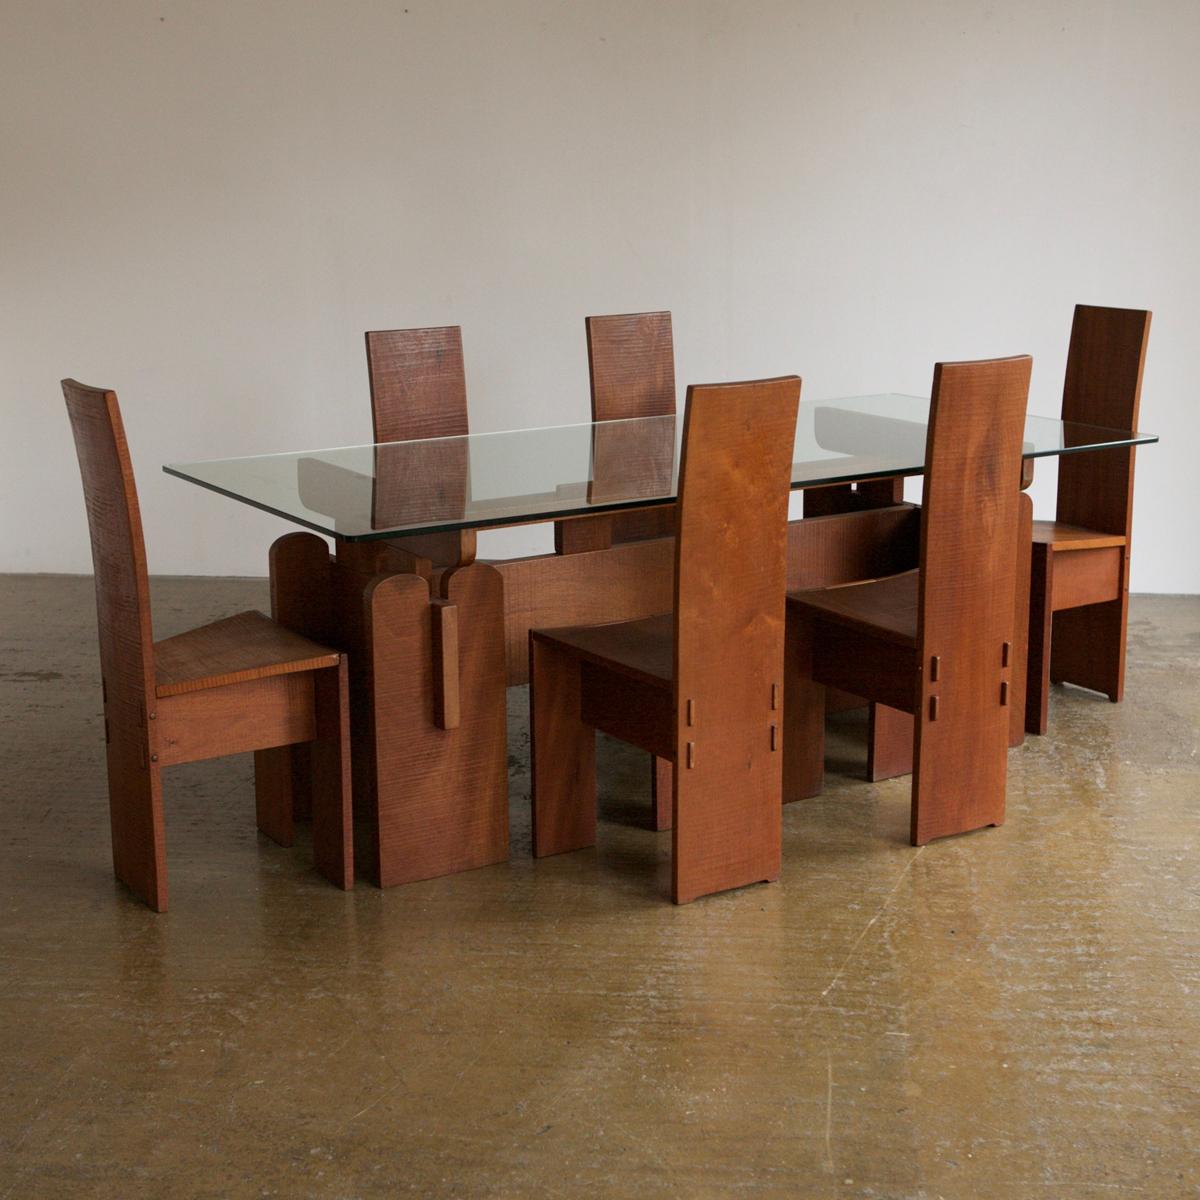 This table and 6 chairs from 1970's Italy is attributed to Guiseppe Rivadossi, but the piece is unsigned. The solid walnut table base and chairs have a carved textured surface and the design is characteristic of the Rivadossi style in which the